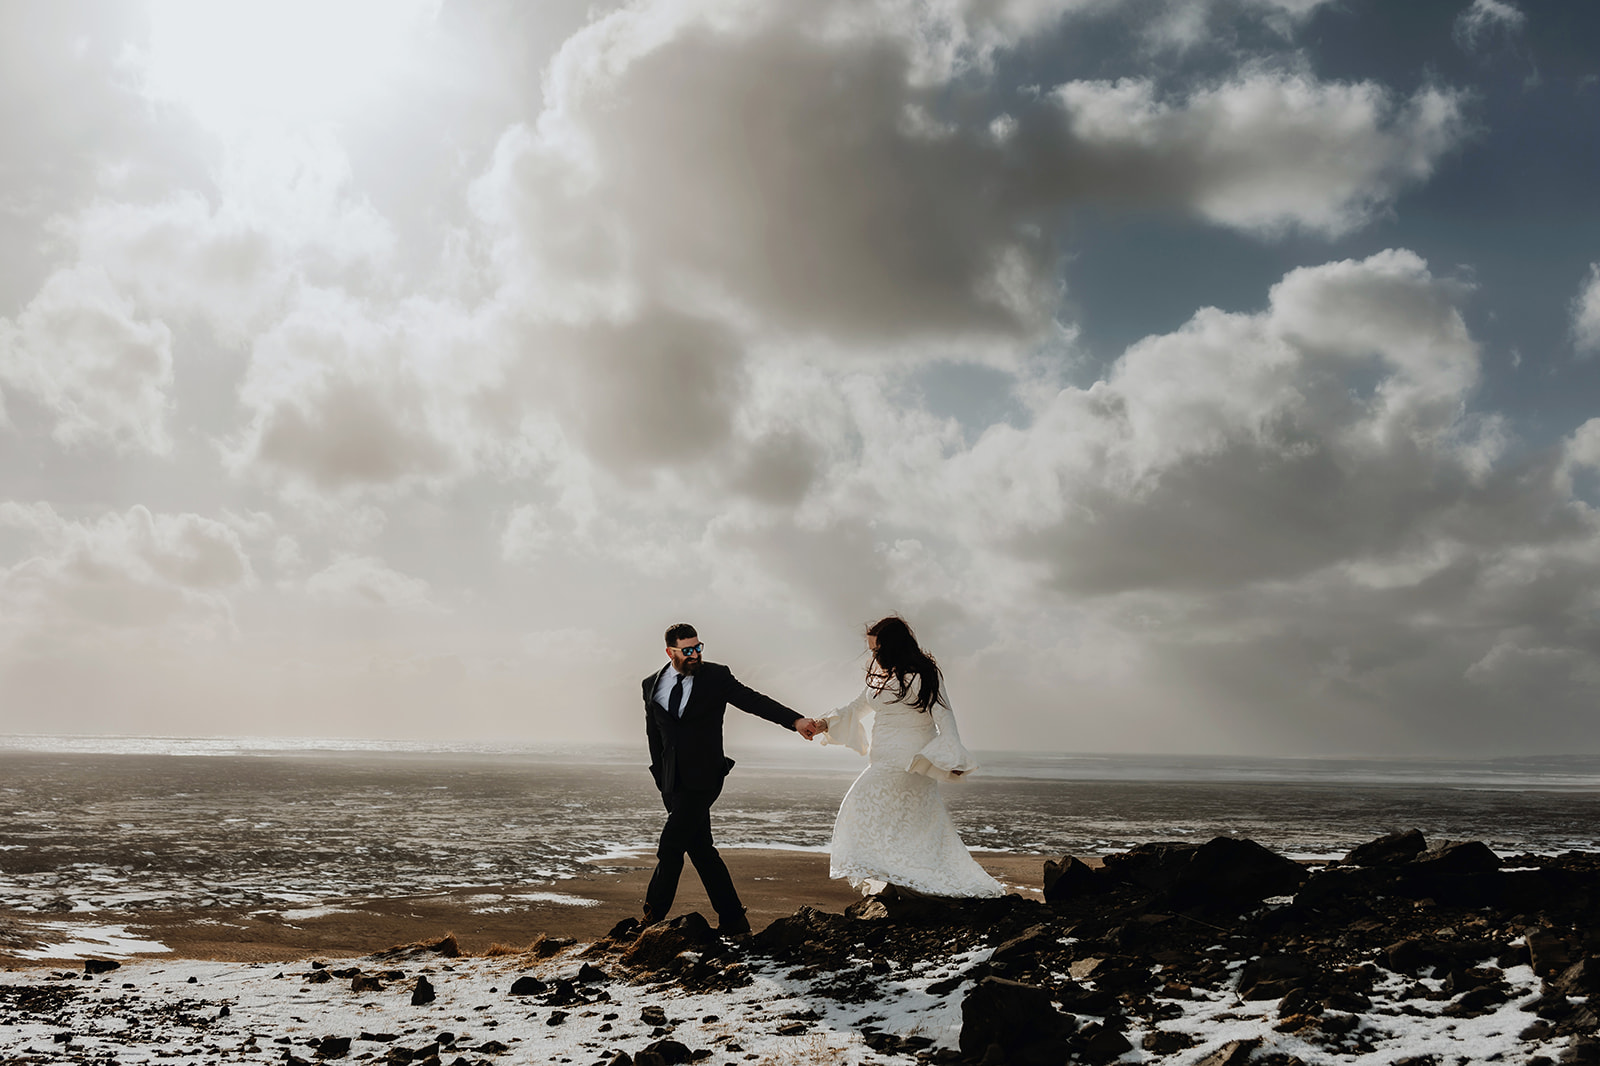 Bride and groom is holding hands in a snowy landscape with dramatic clouds on their elopement in Iceland